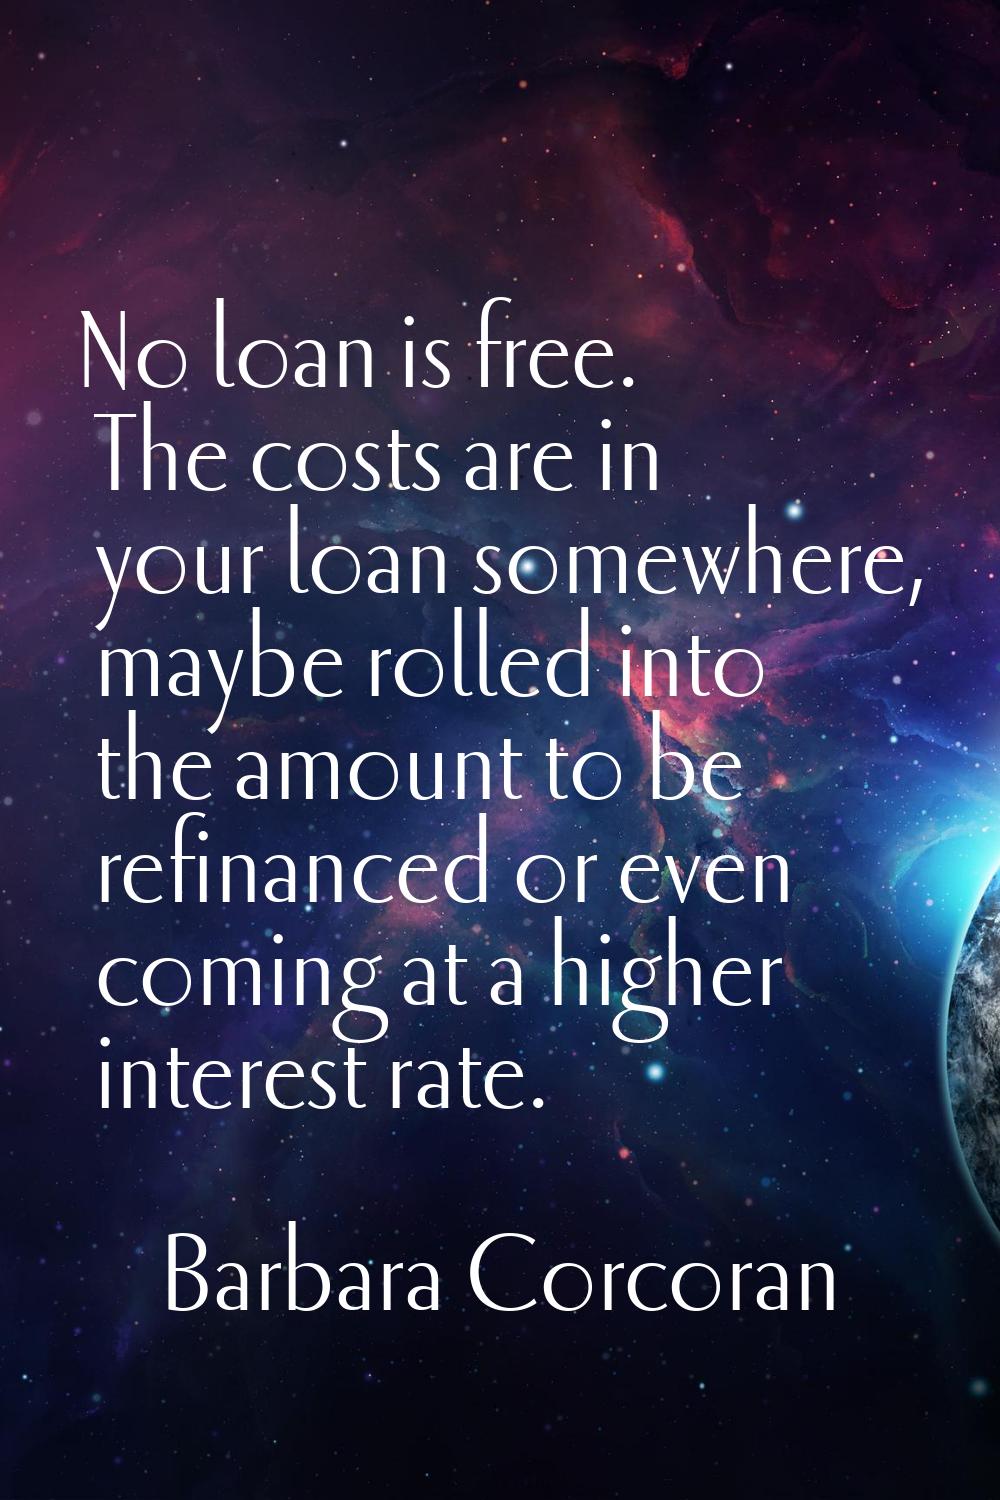 No loan is free. The costs are in your loan somewhere, maybe rolled into the amount to be refinance